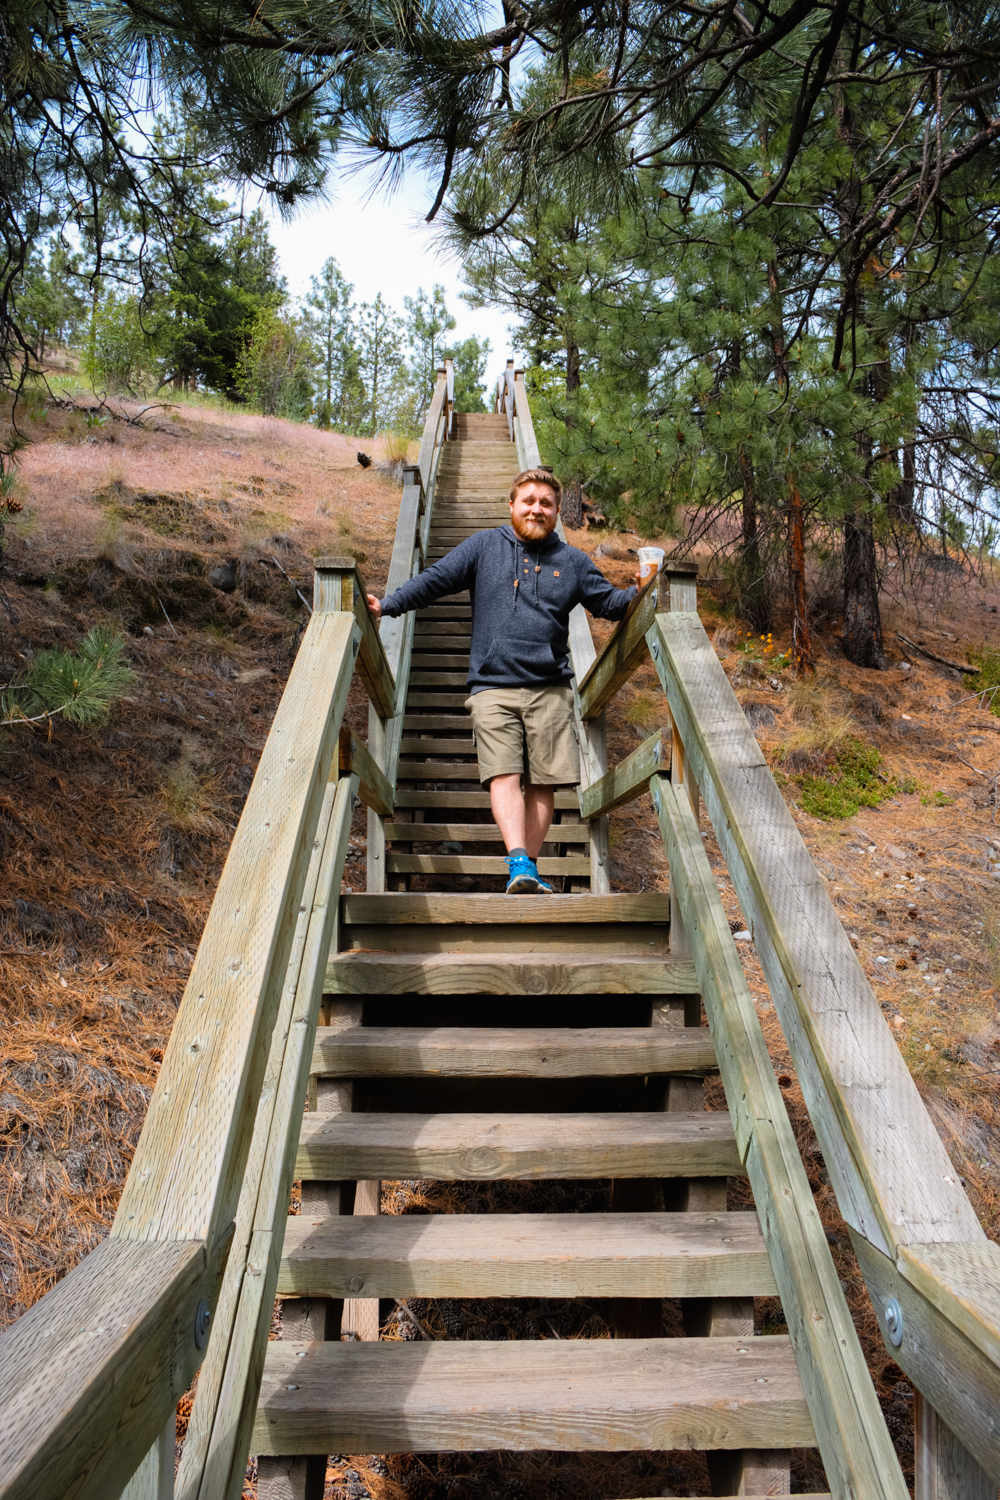 Man hiking down a wooden staircase